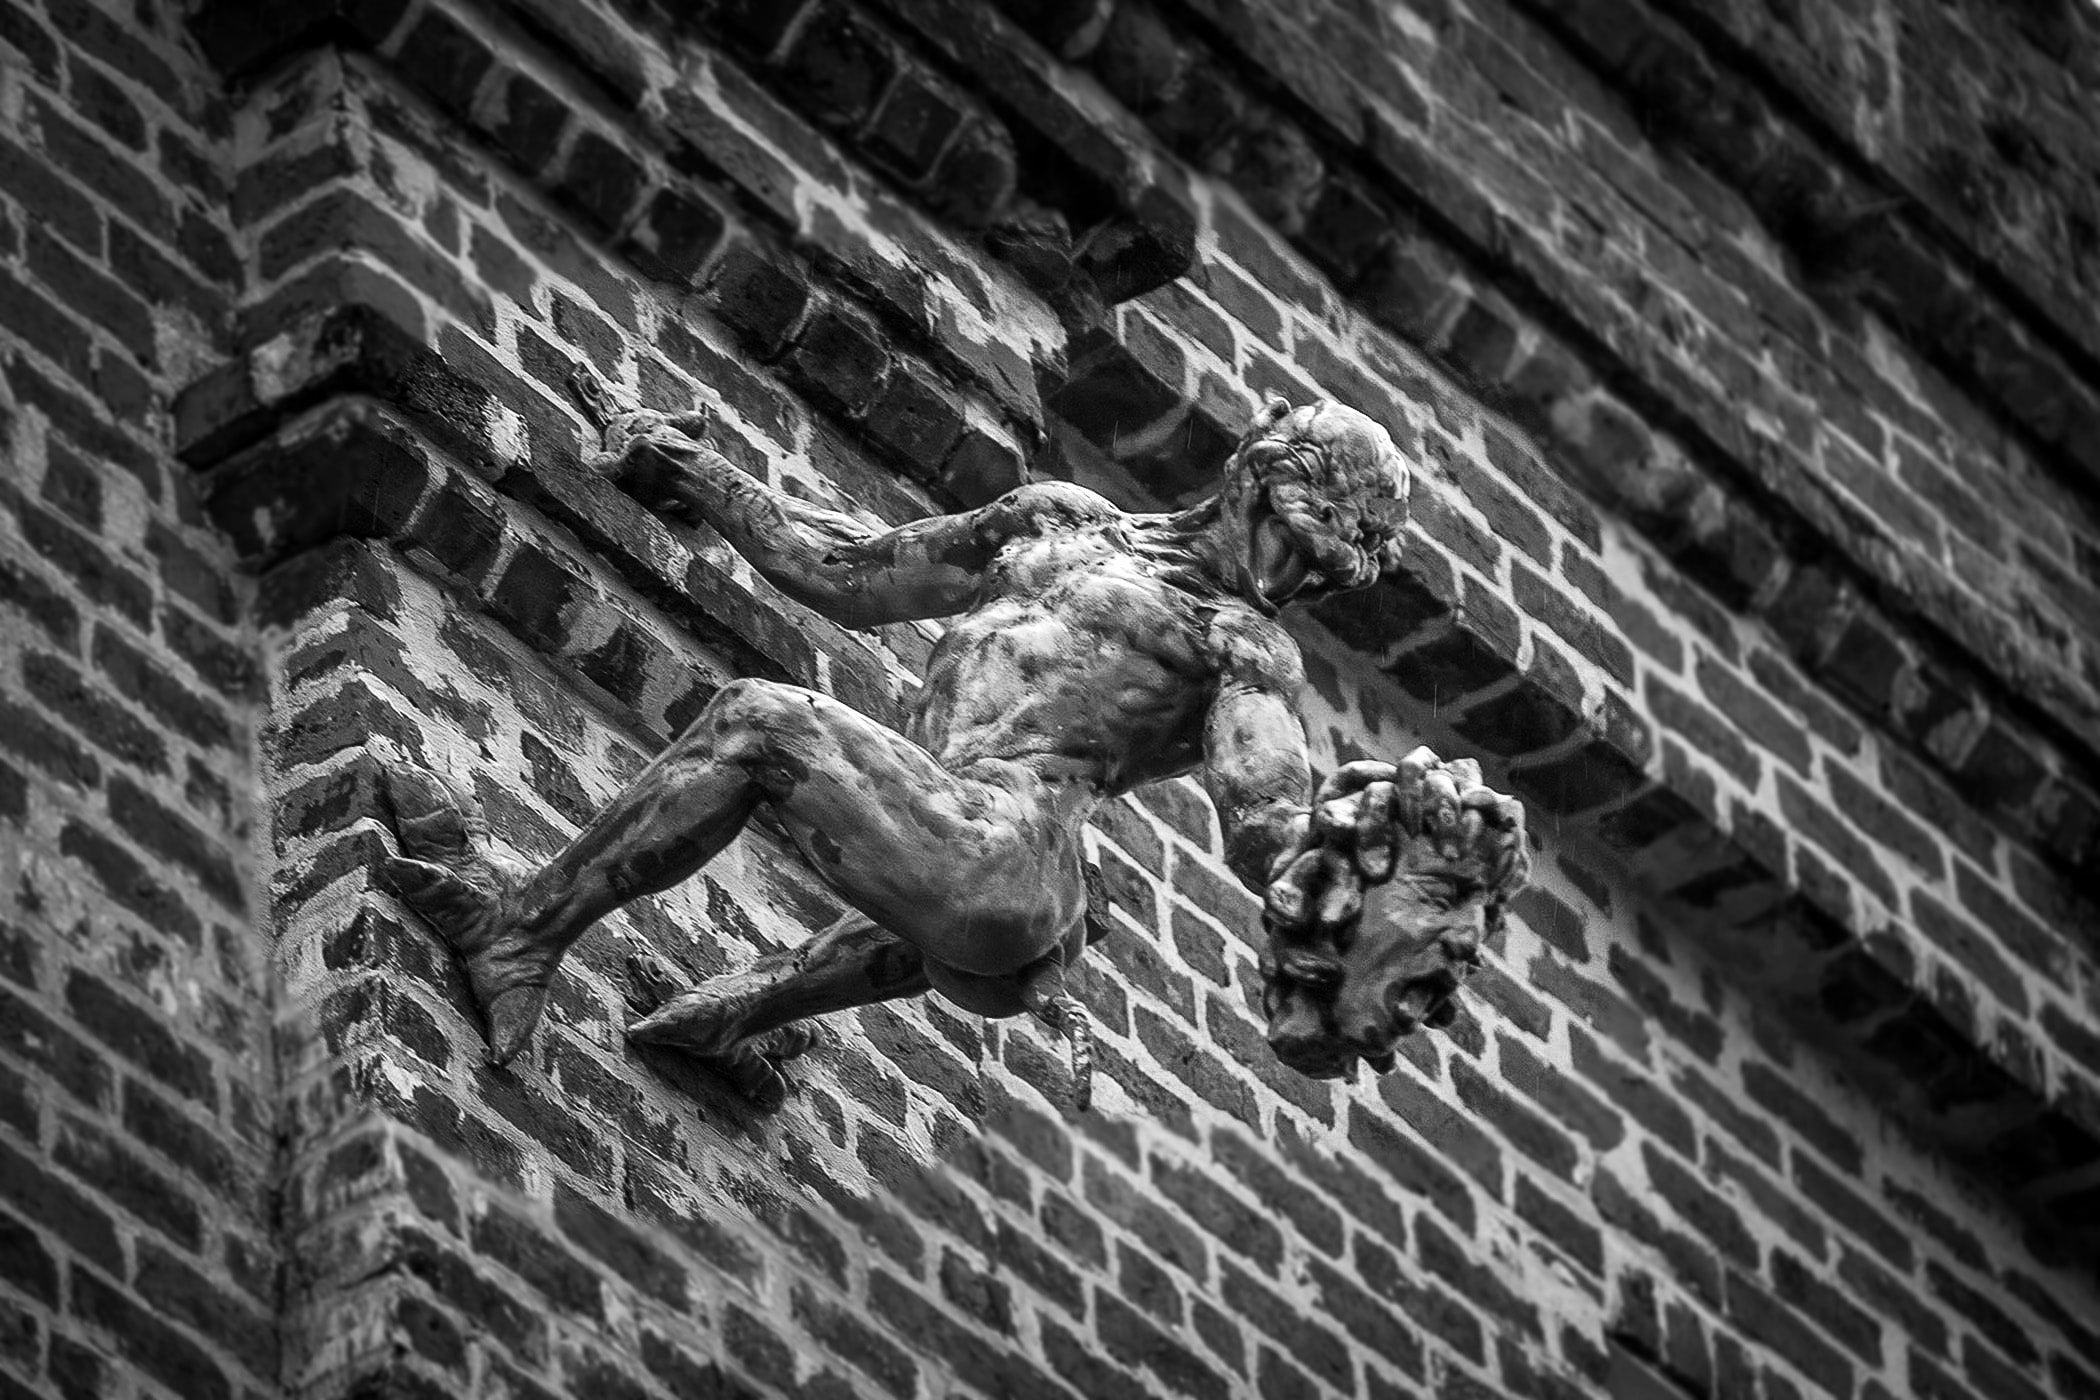 A devilish figures holds a severed head on the side of a Jackson Avenue building not far from the original site of the Devil’s Mansion. (Photo by Michael DeMocker)